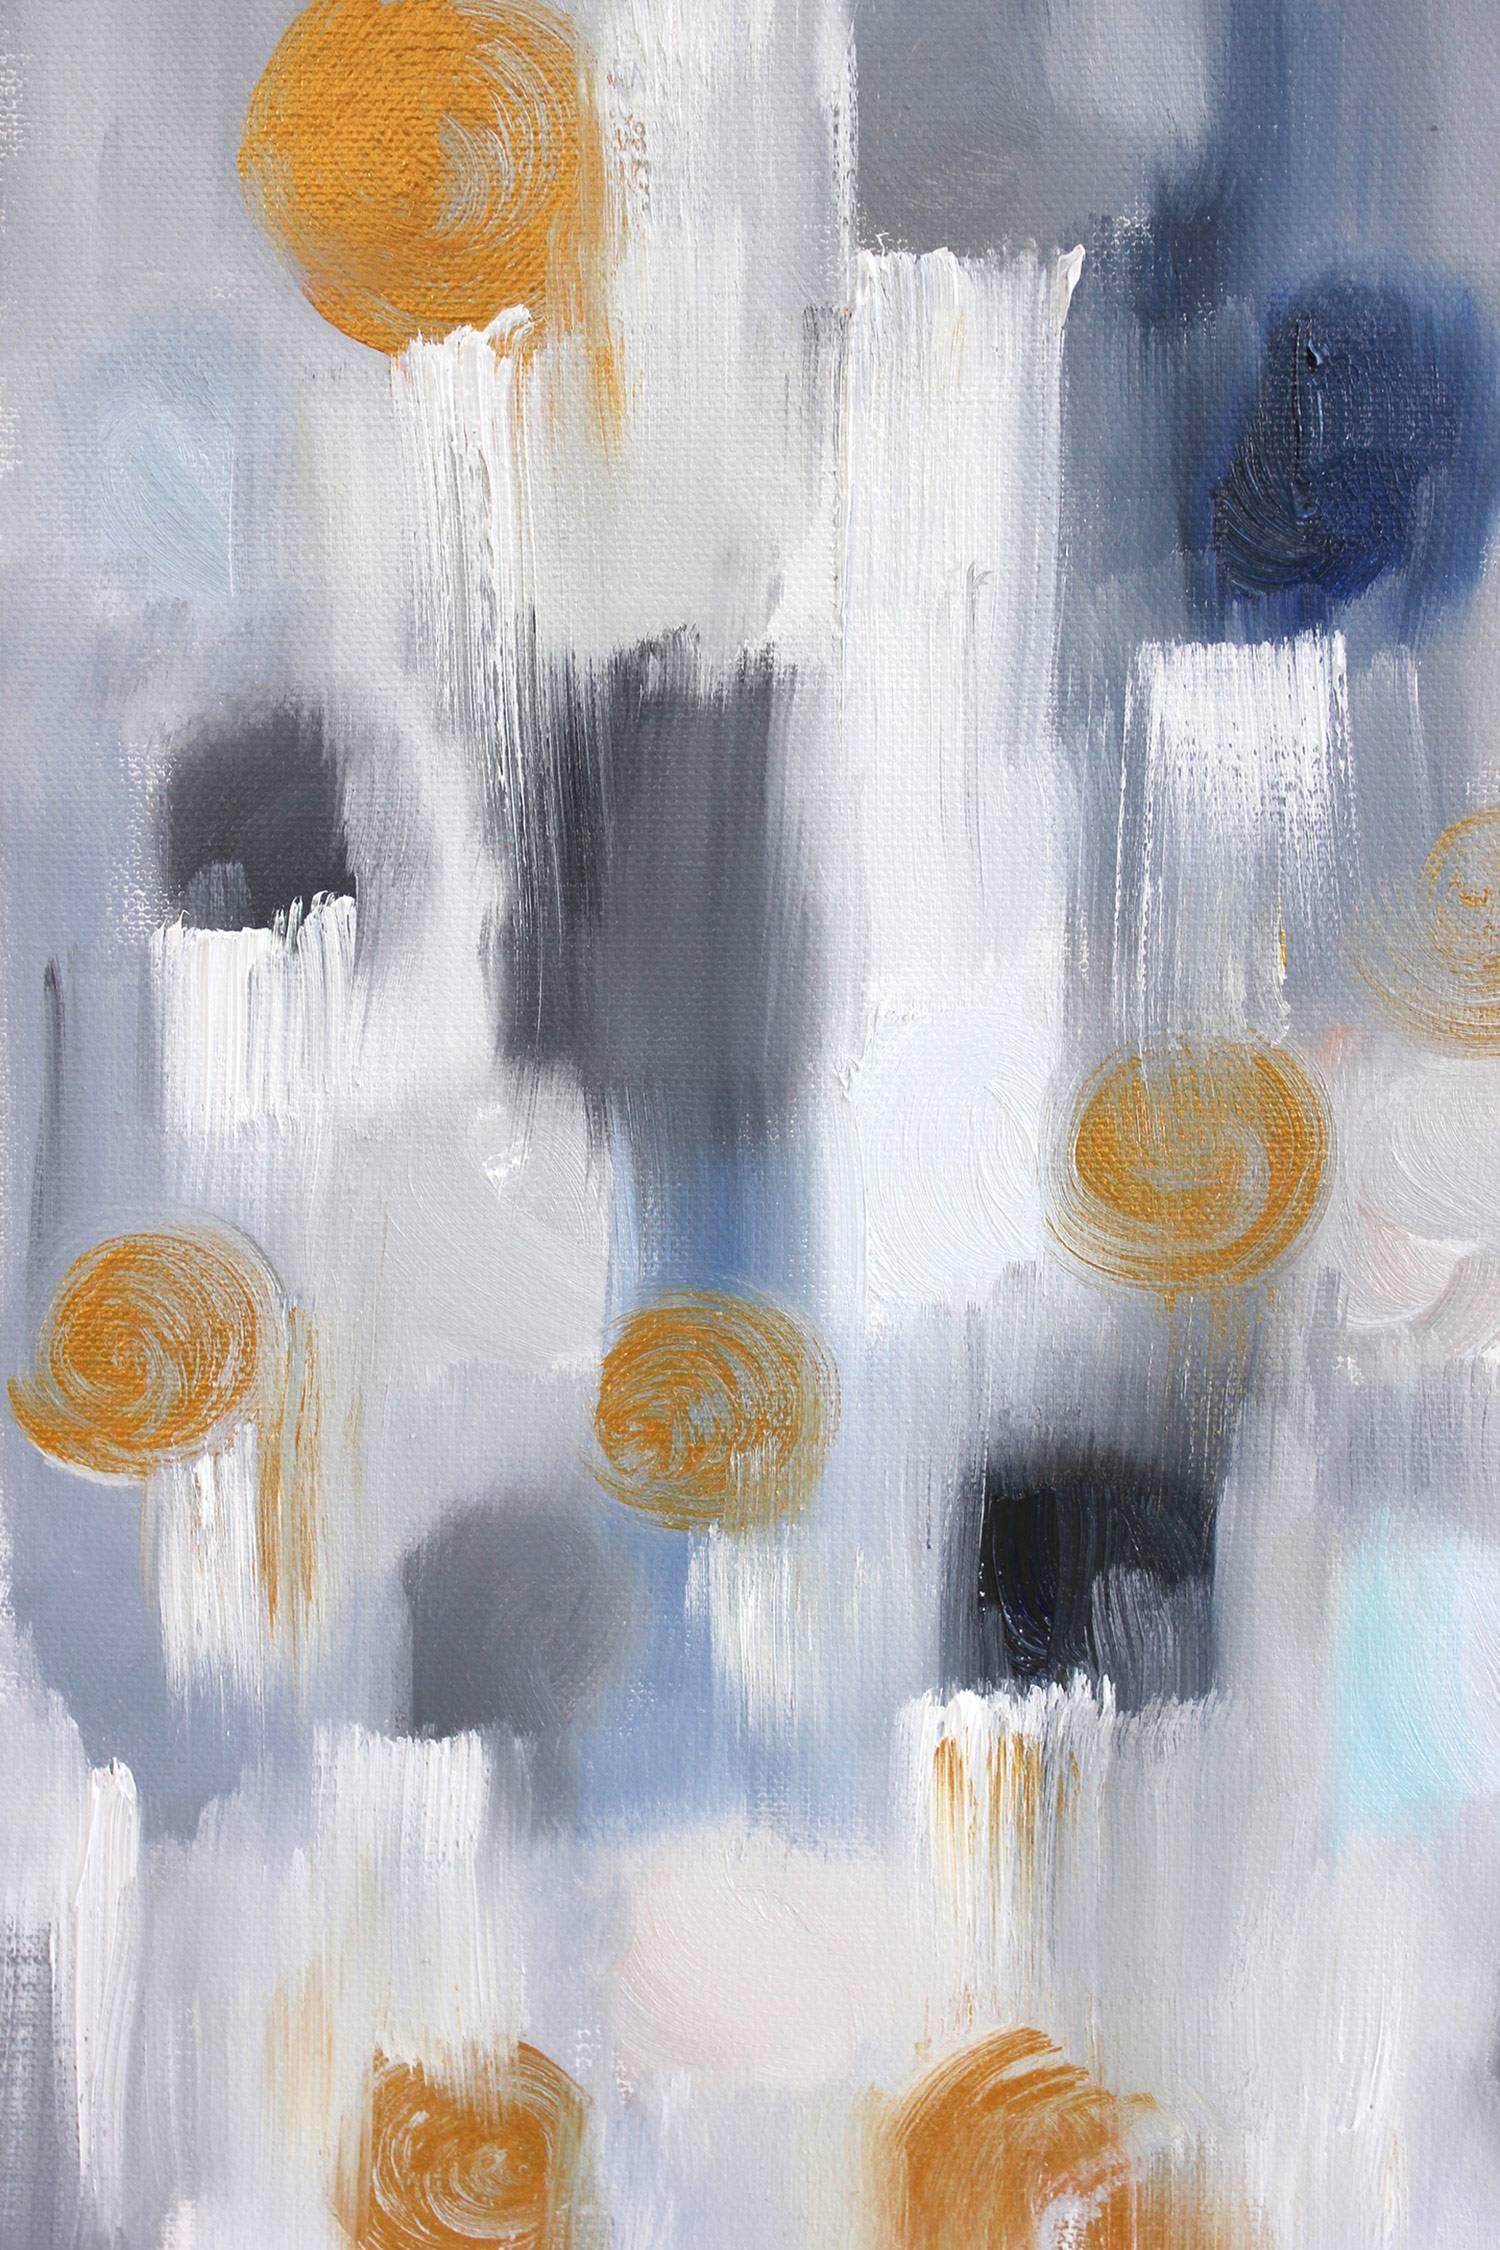 Dripping Dots, Gold Peaks - Contemporary Painting by Cindy Shaoul